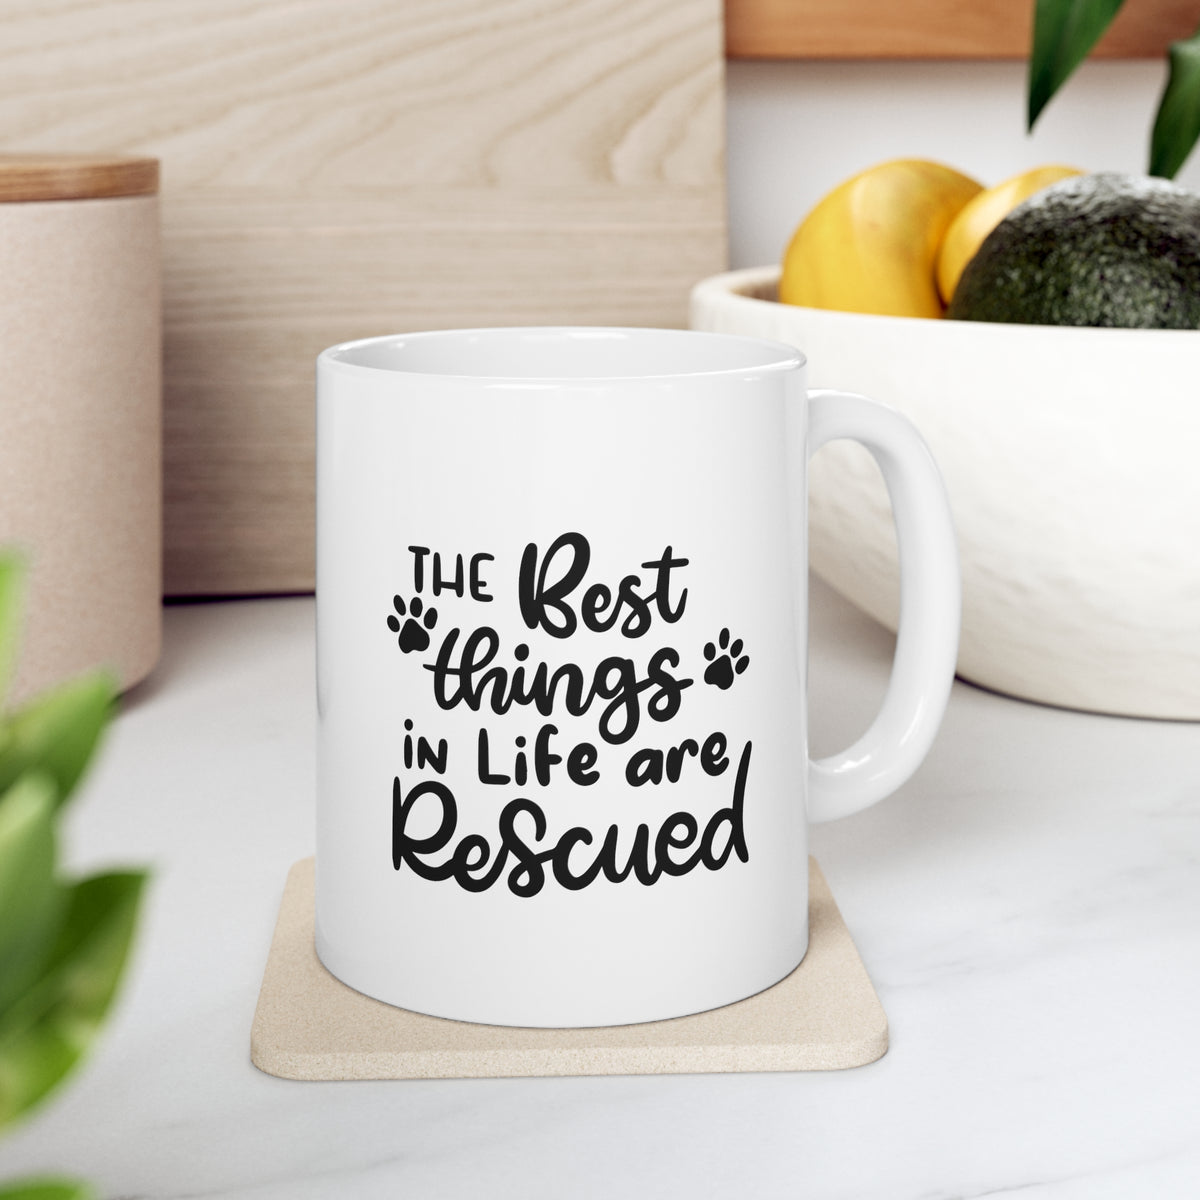 The Best Things In Life Are Rescued Ceramic Mug 11oz